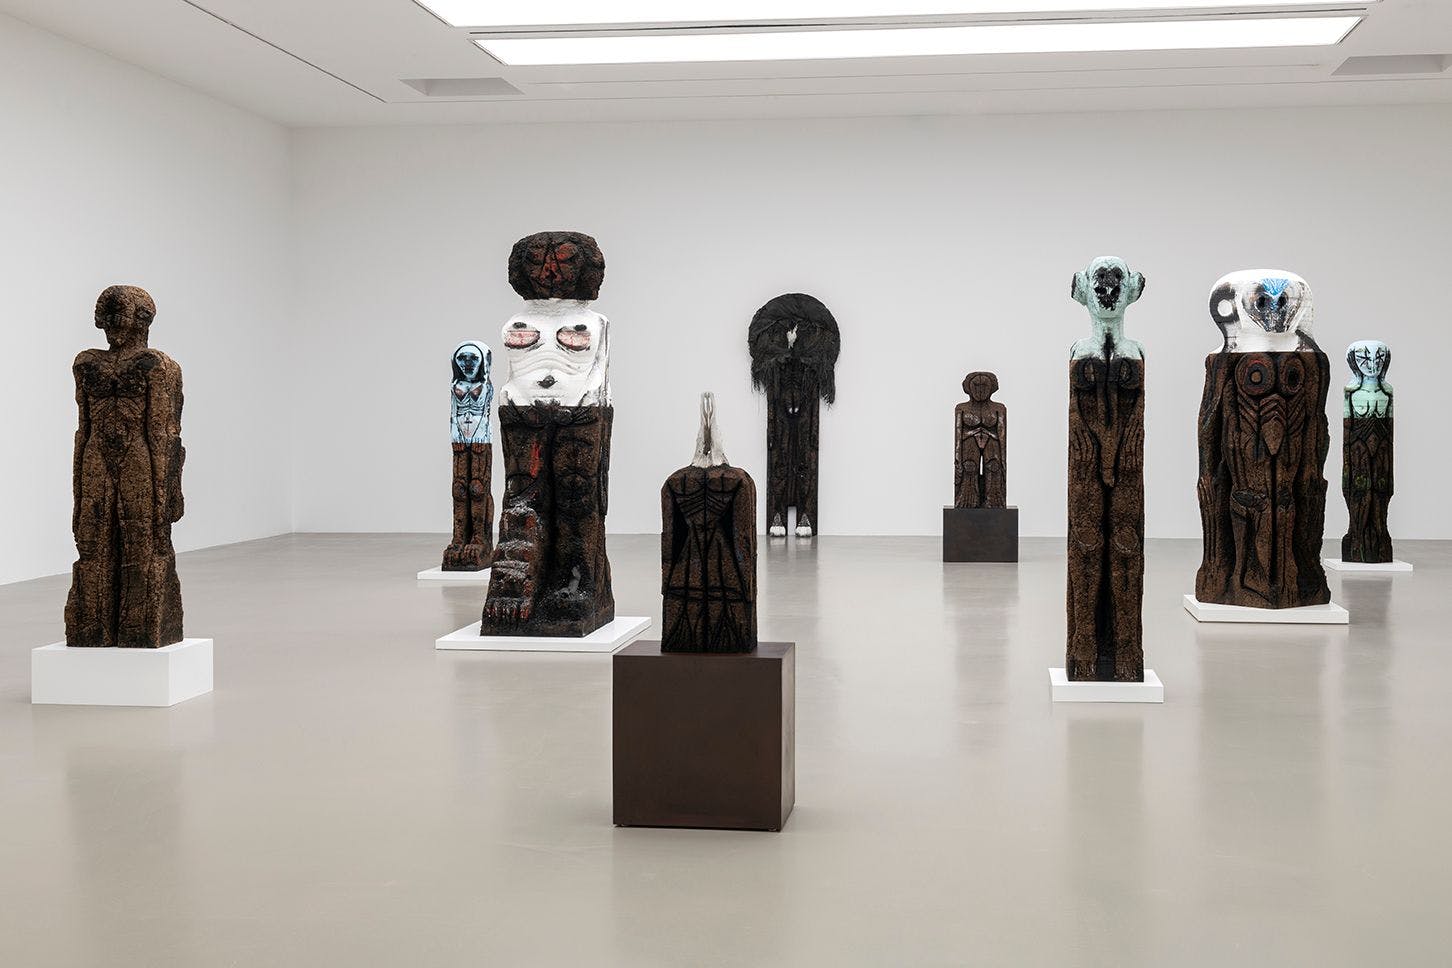 Installation view of the Huma Bhabha exhibition "A fly appeared, and disappeared," at MO.CO. Montpellier